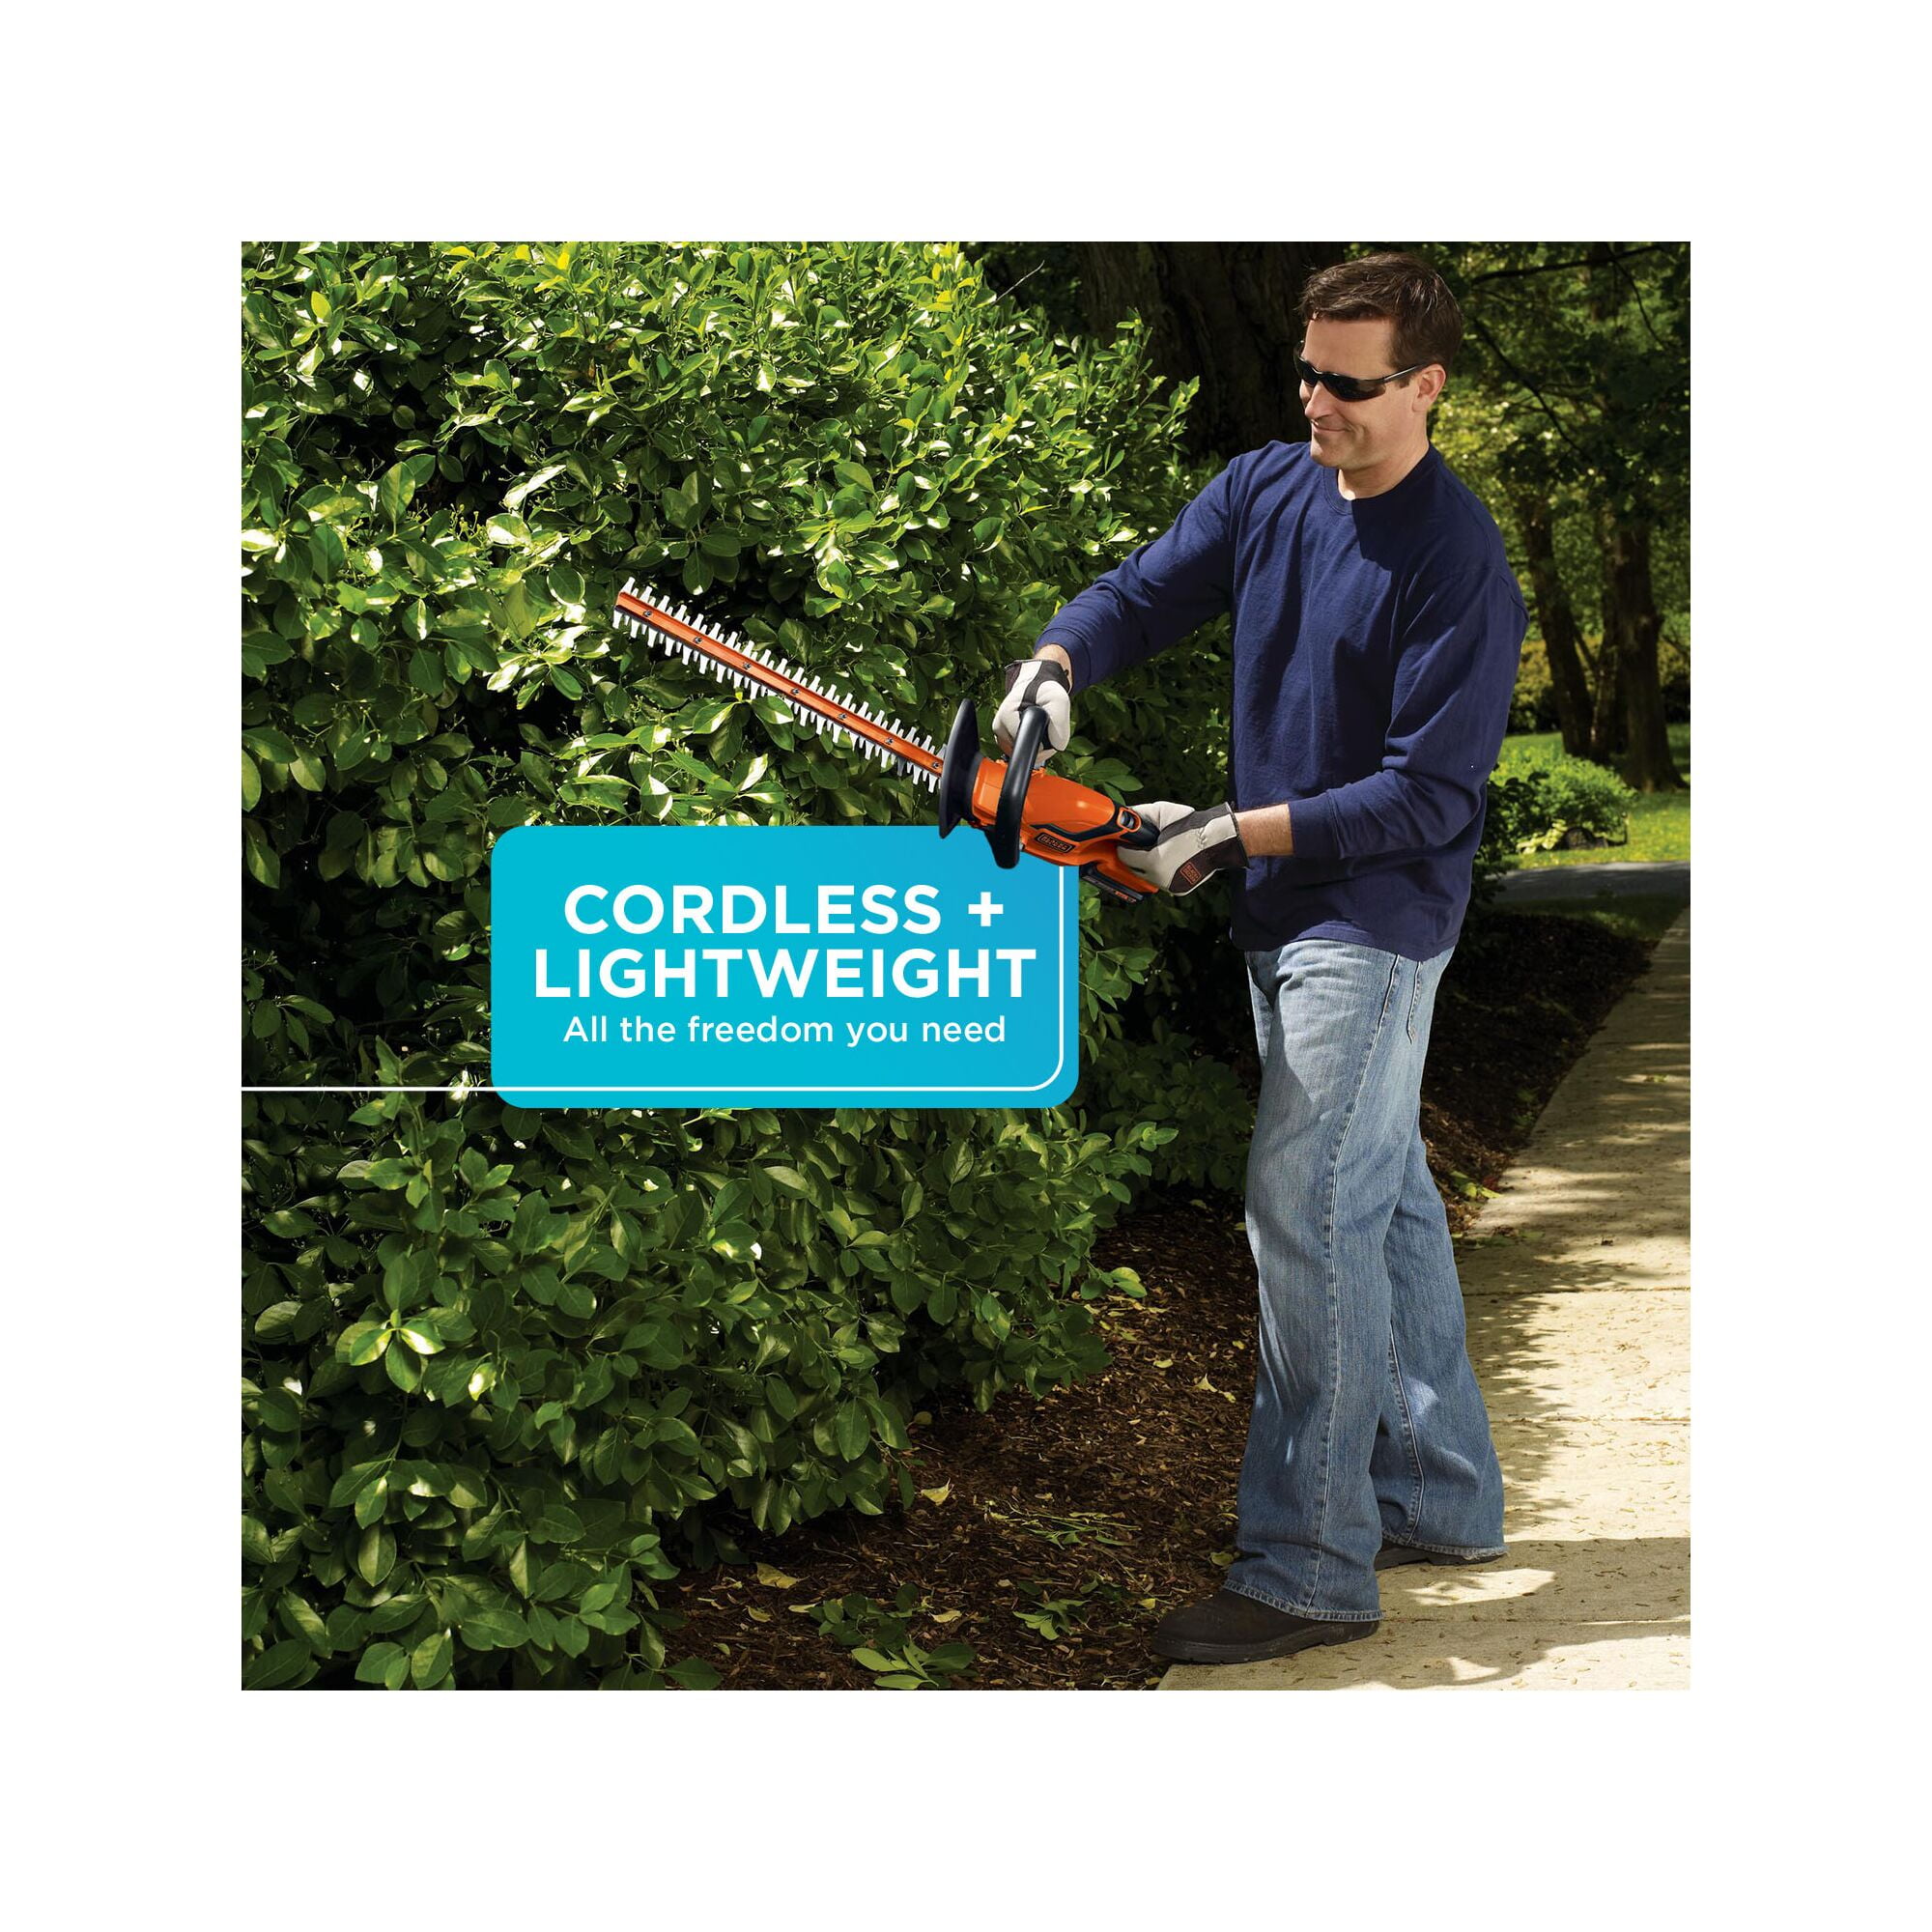 Black+Decker 20V Max Cordless Hedge Trimmer - Battery and Charger Not  Included, 22 #LHT2220B (1/Pkg.)